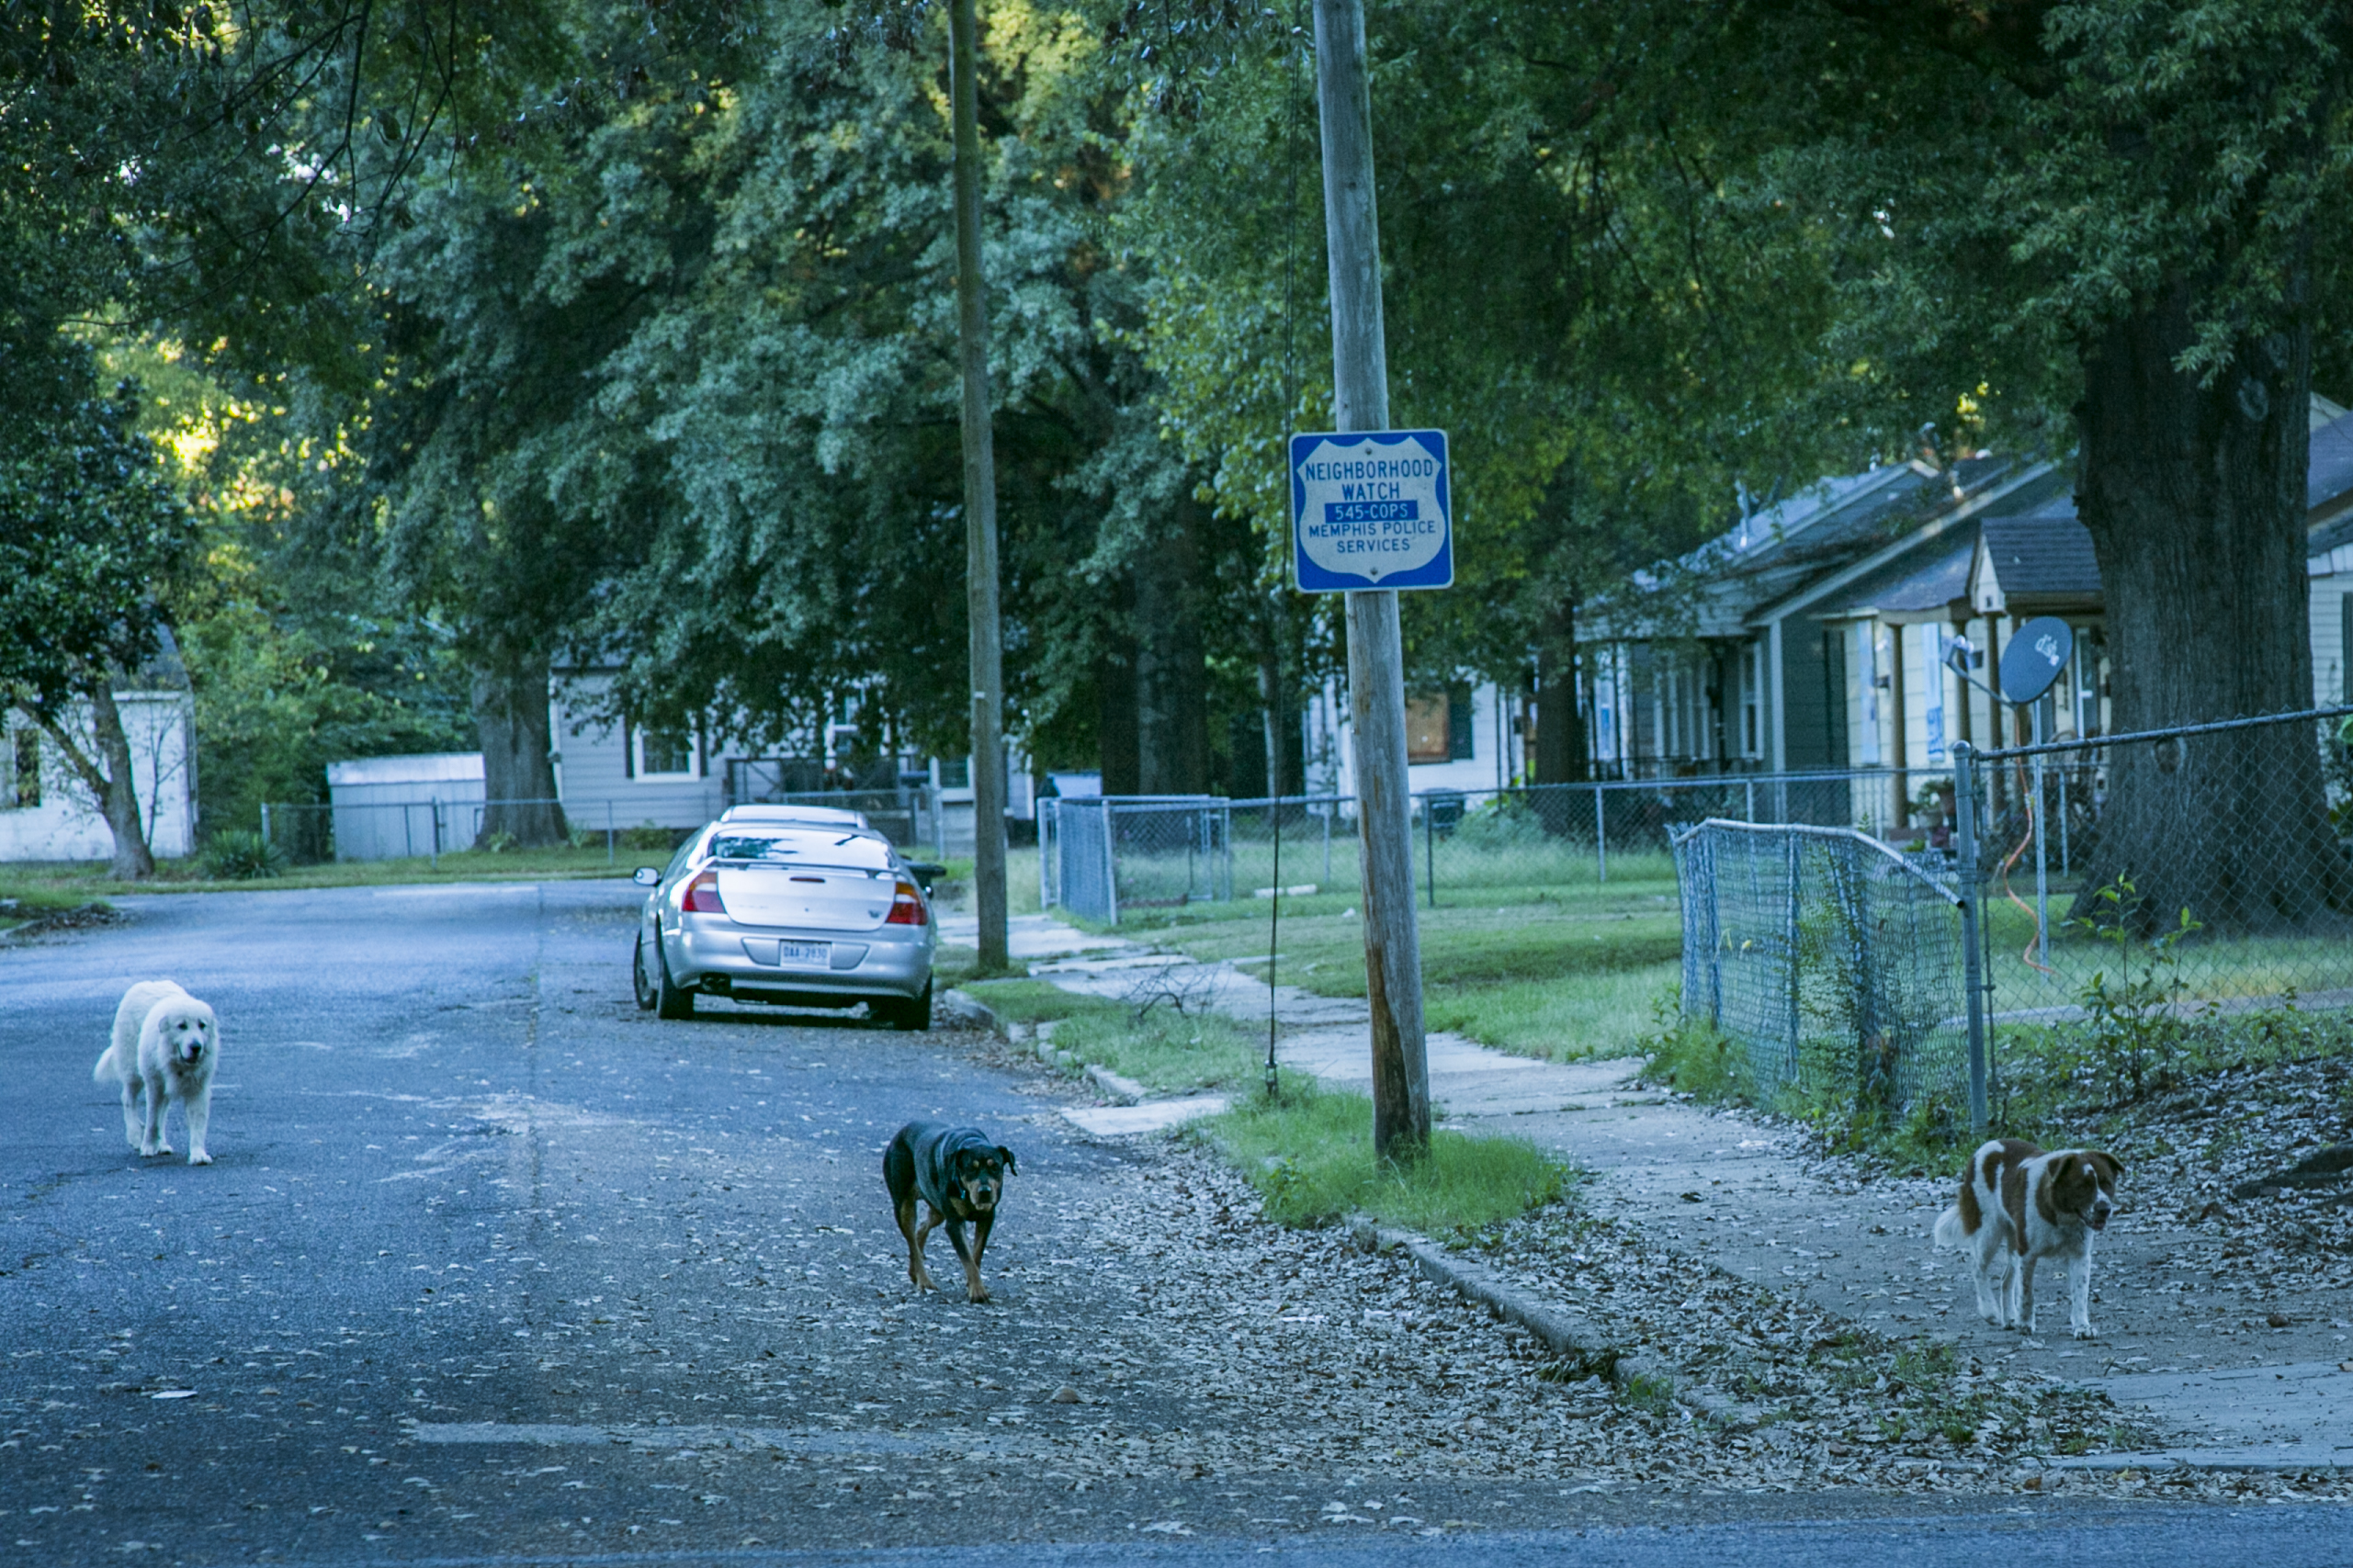 Stray dogs, a symptom of blighted and abandoned properties, wander the streets of Mitchell Heights. Blighted and abandoned properties in majority-minority, low-income neighborhoods are part of the legacy of redlining in Memphis. (Natalie Eddings)